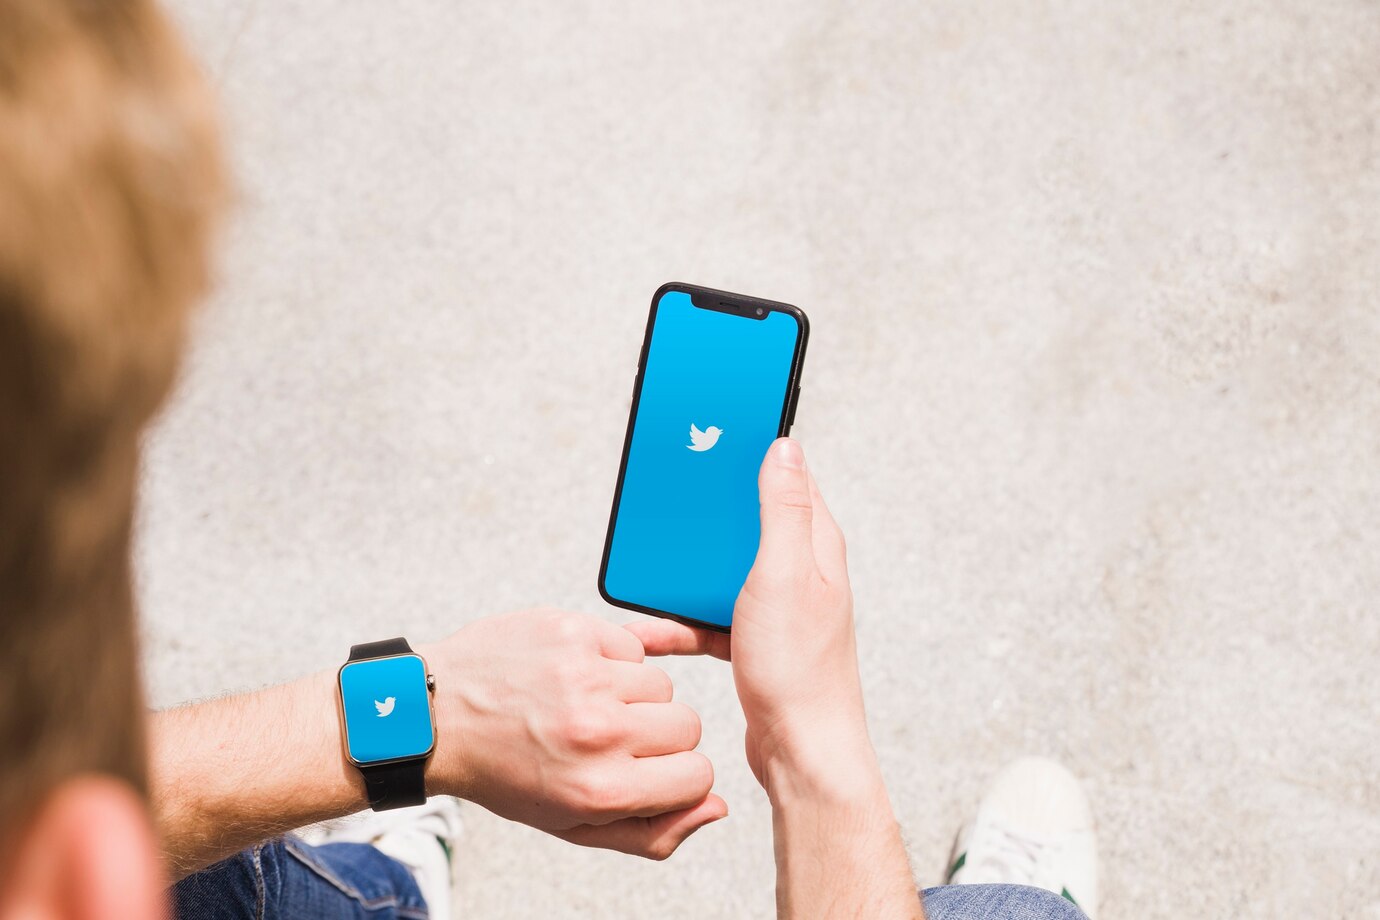 Twitter Fleets: Utilizing Temporary Content for Engagement